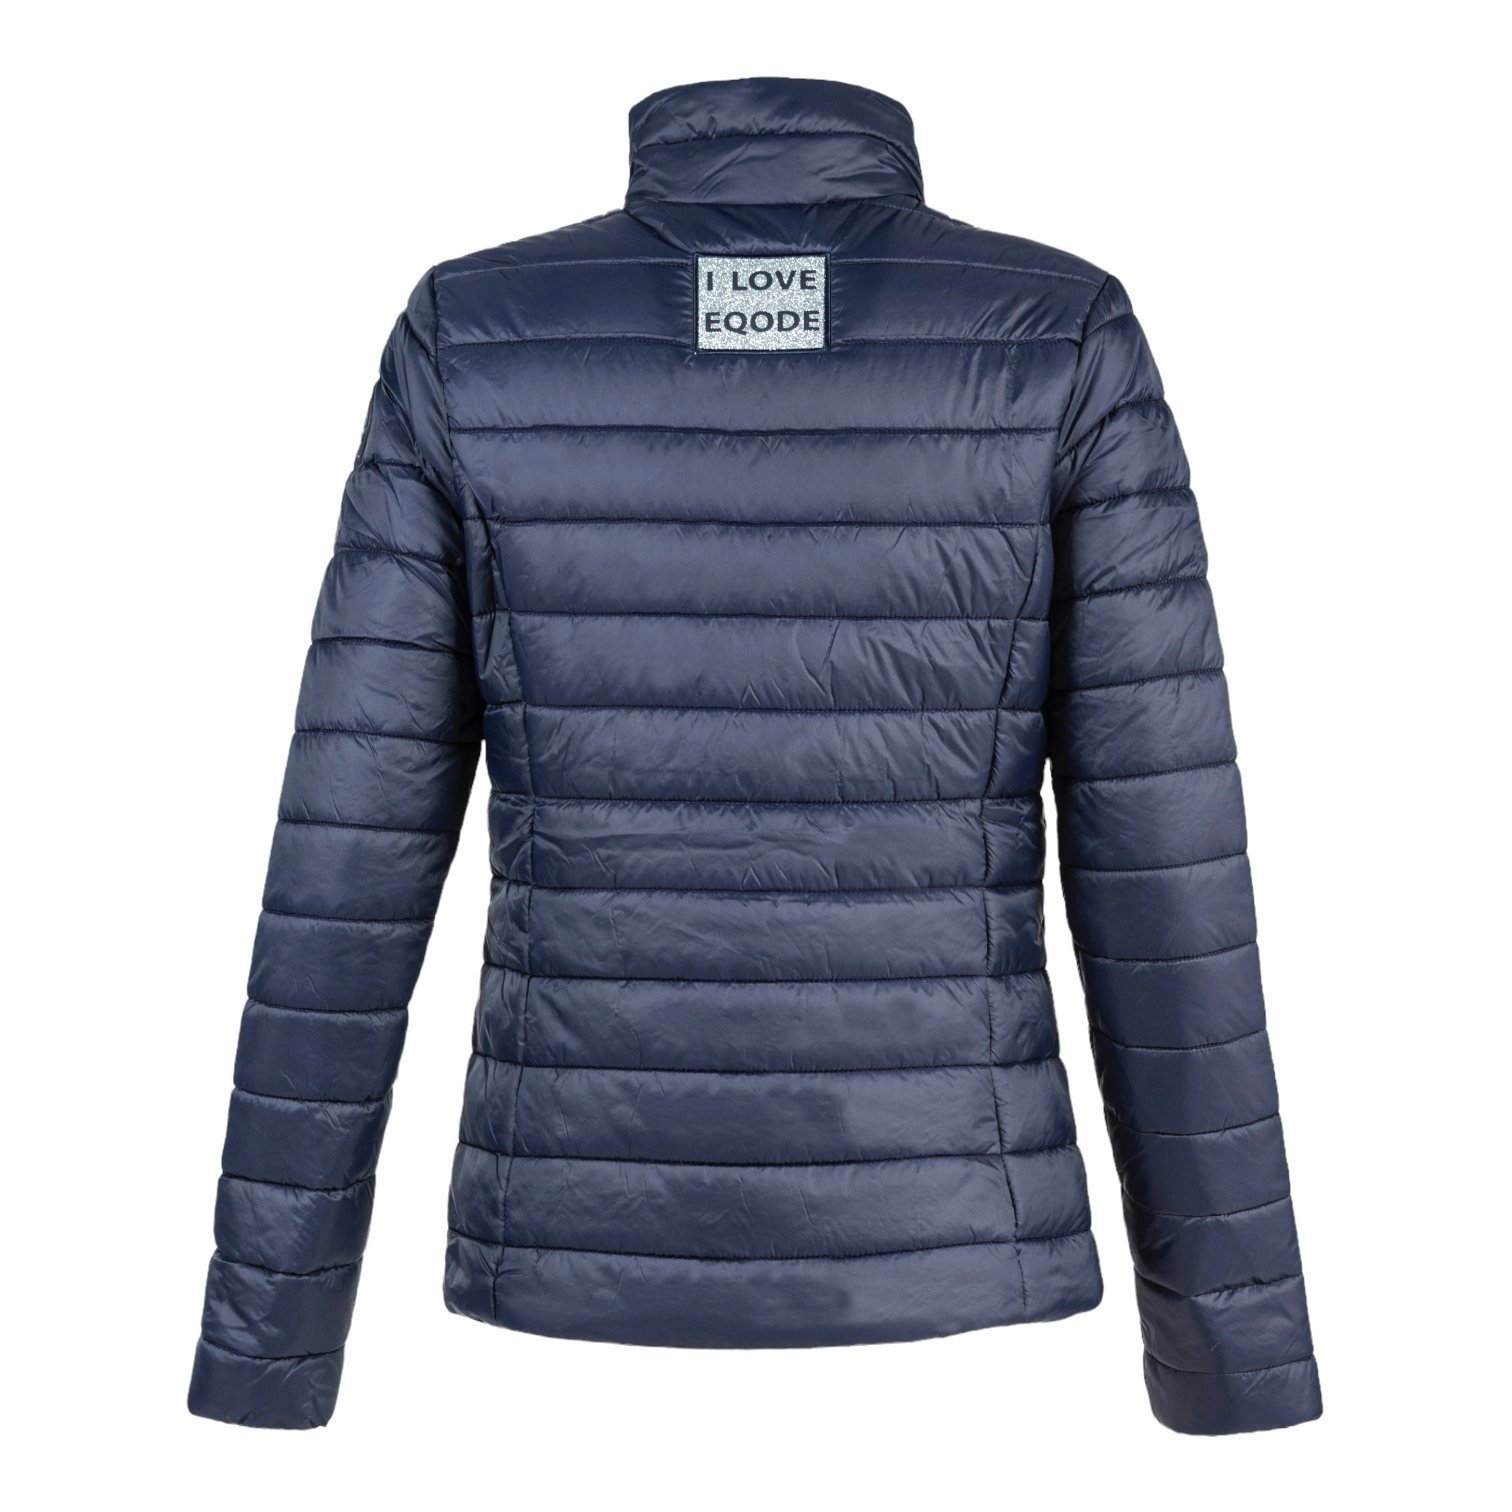 by Debby Thermo Damen Equiline eqode Reitjacke